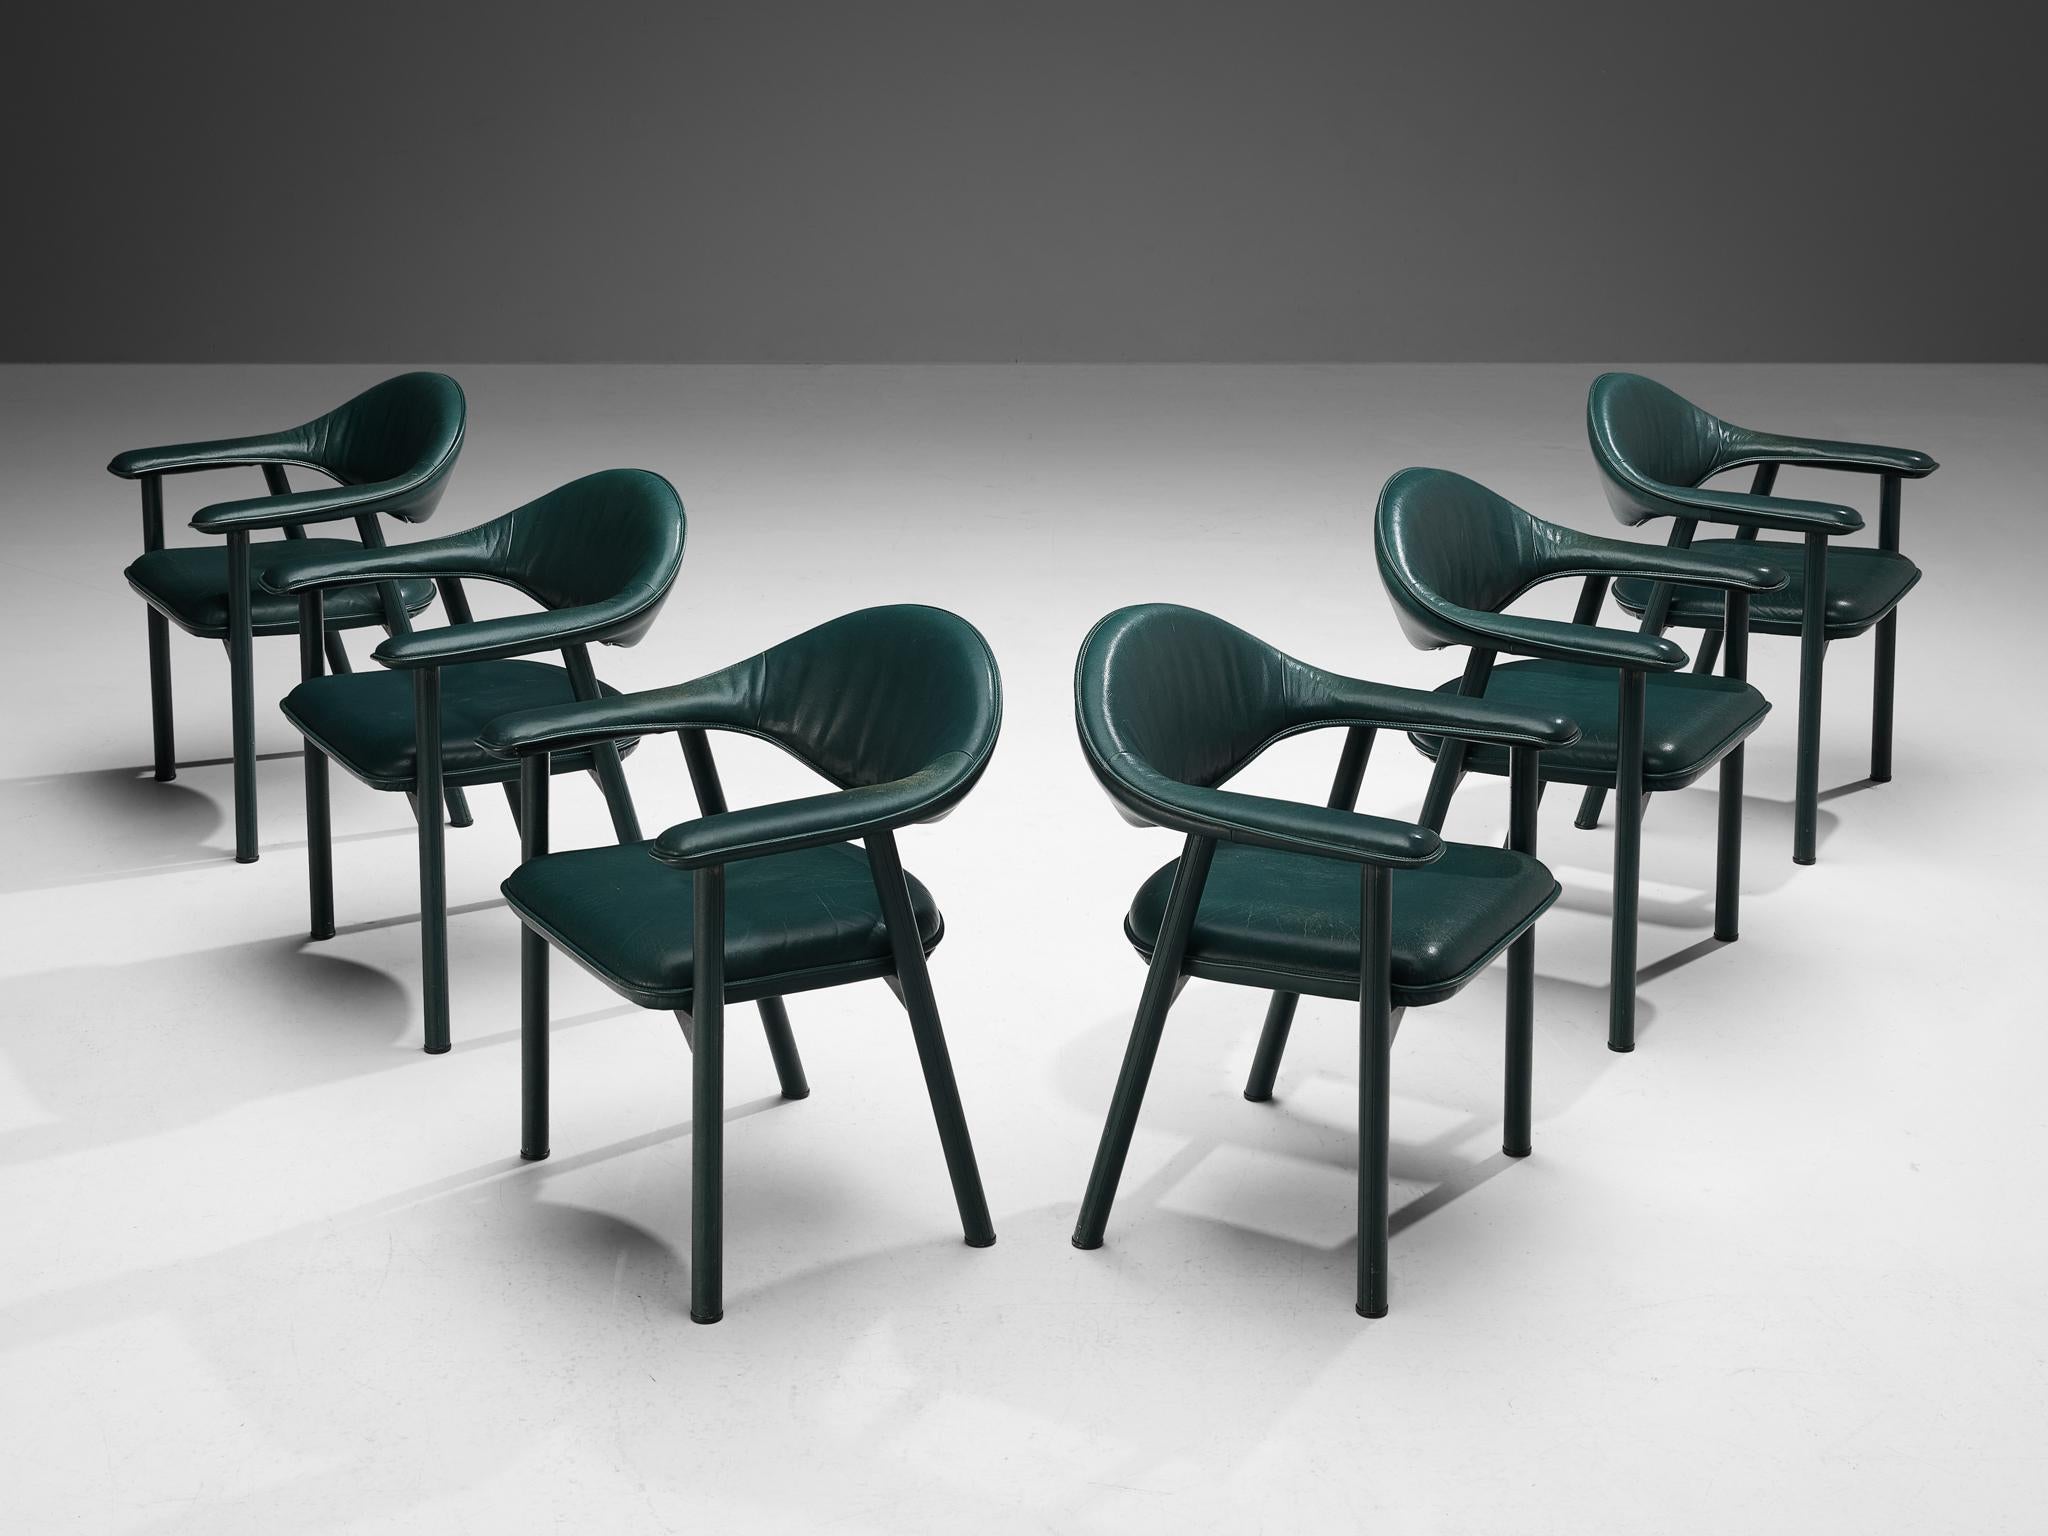 De Sede, set of six dining chairs, leather, Switzerland, 1980s

The design of these stunning armchairs features beautiful clear lines and round shapes. All the elements - backrest, seat, and legs - are executed in forest green leather, which